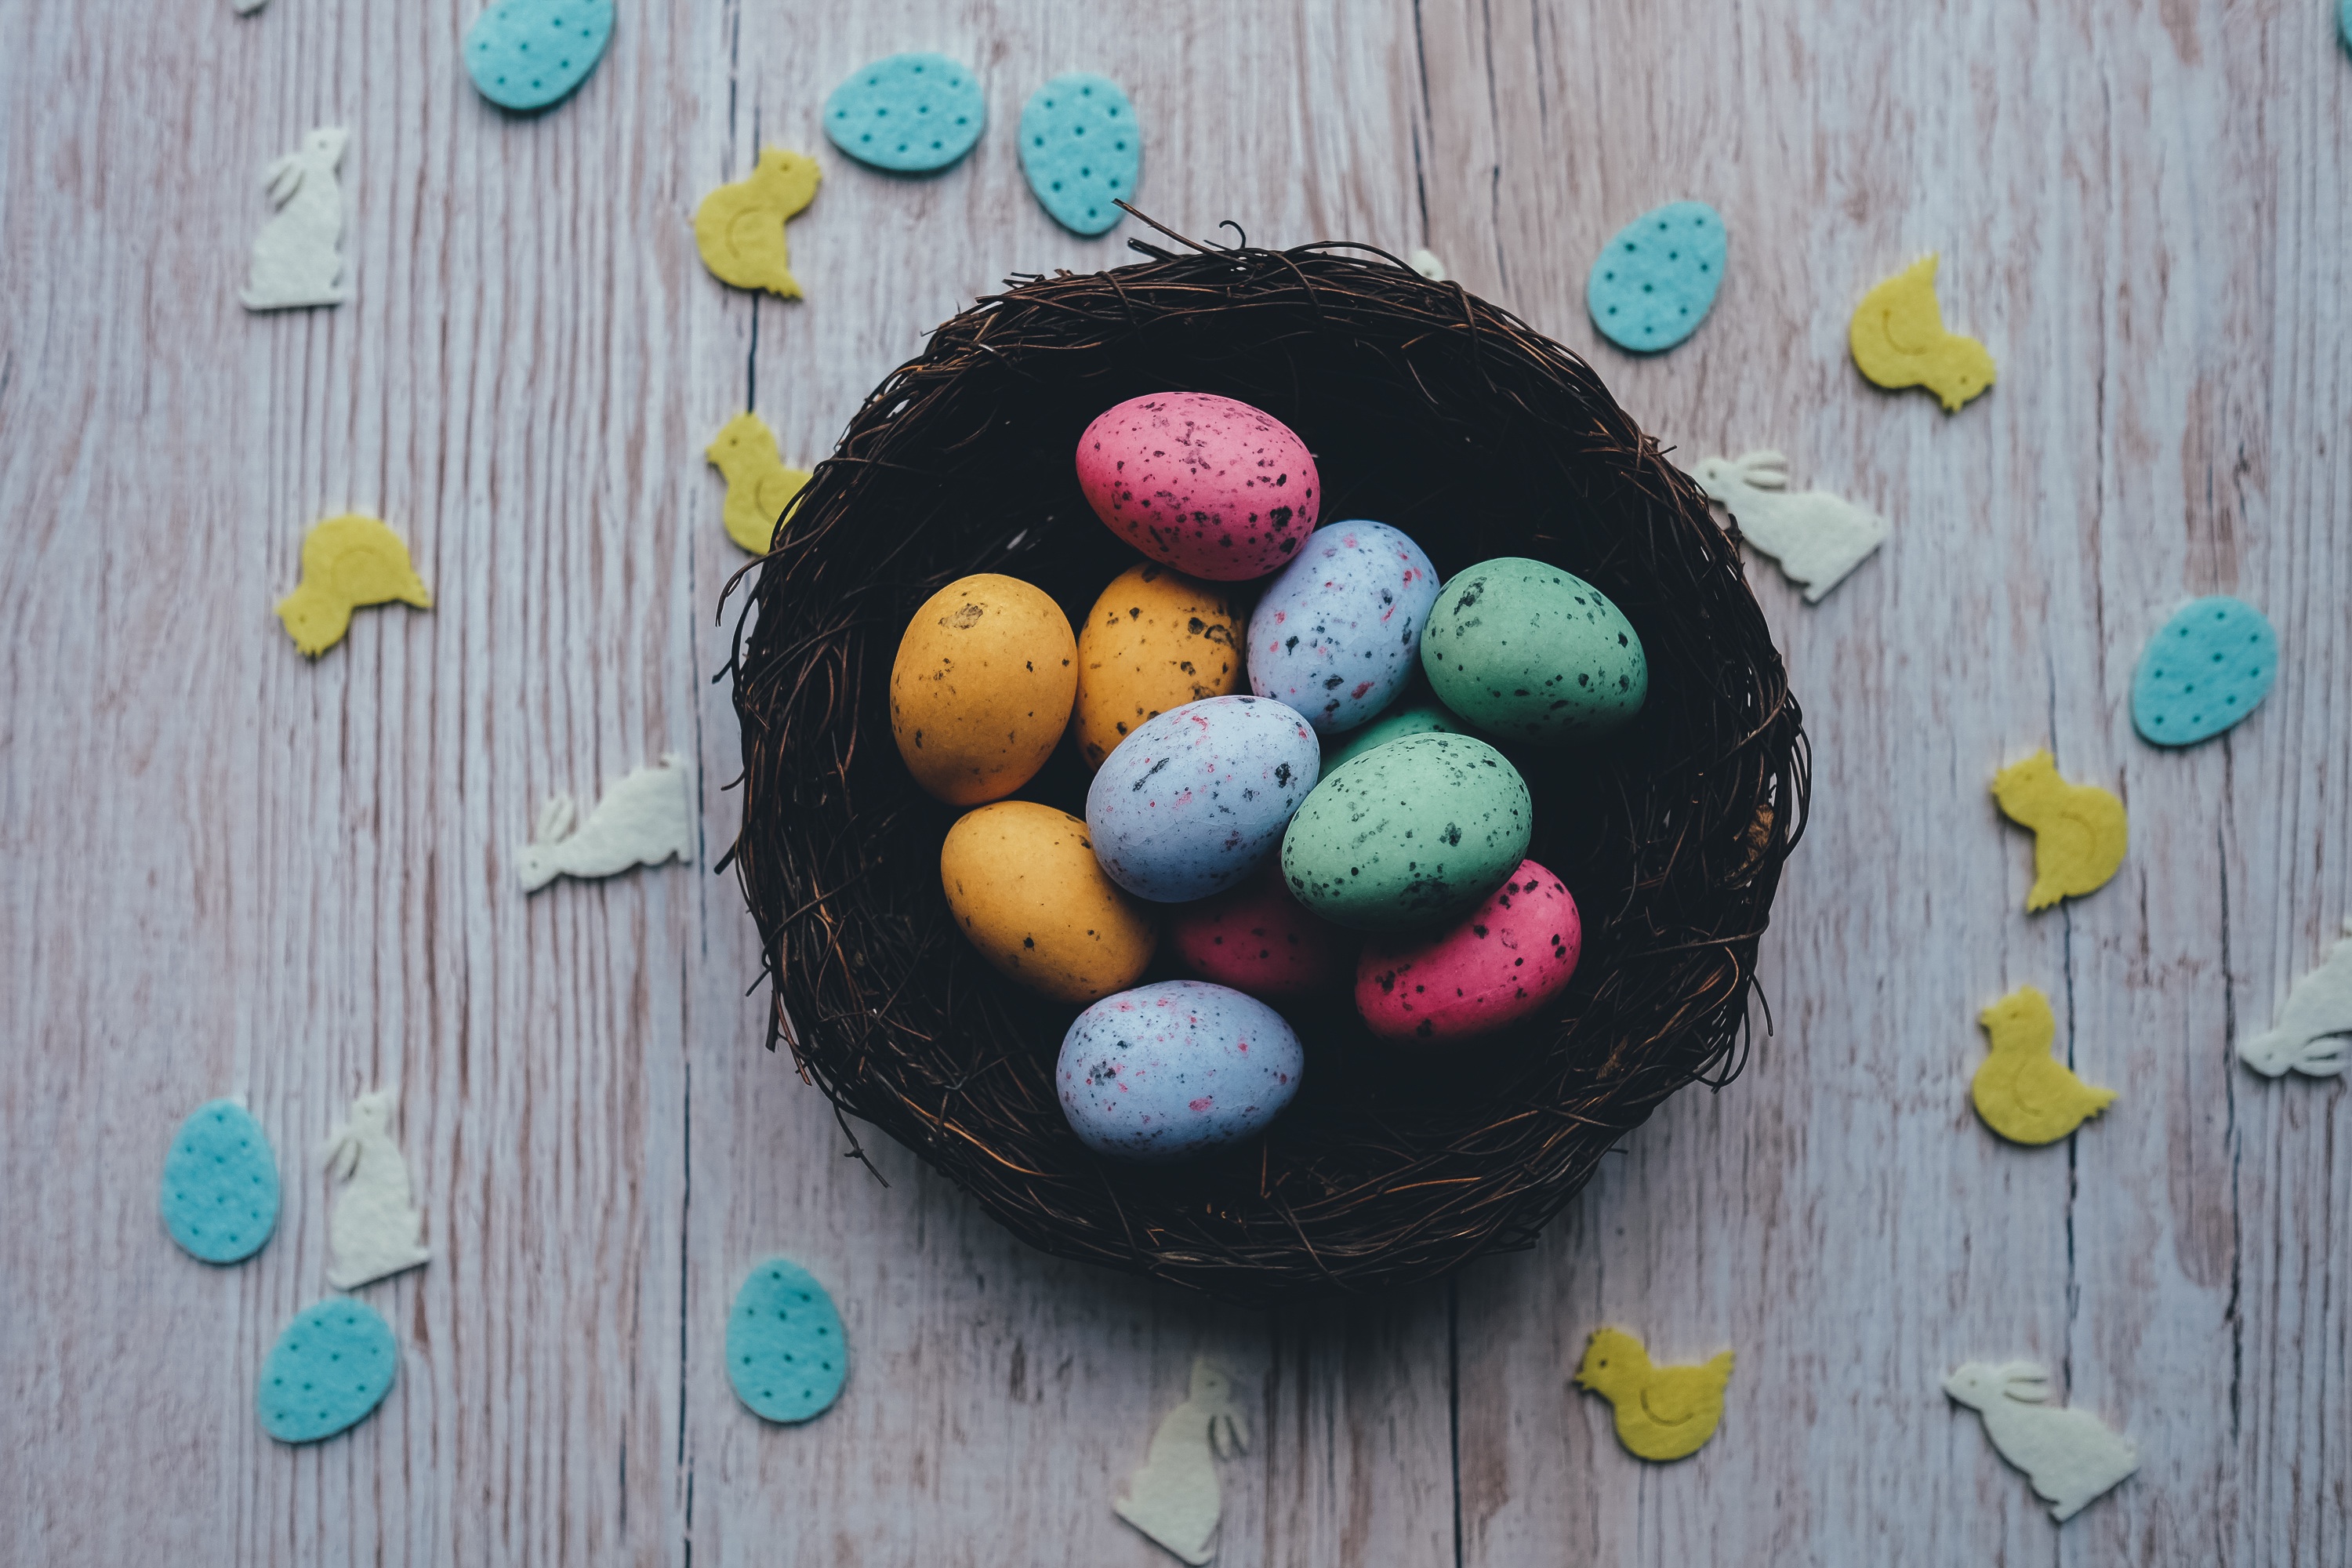 holidays, easter, quail eggs, colored eggs, painted eggs wallpaper for mobile